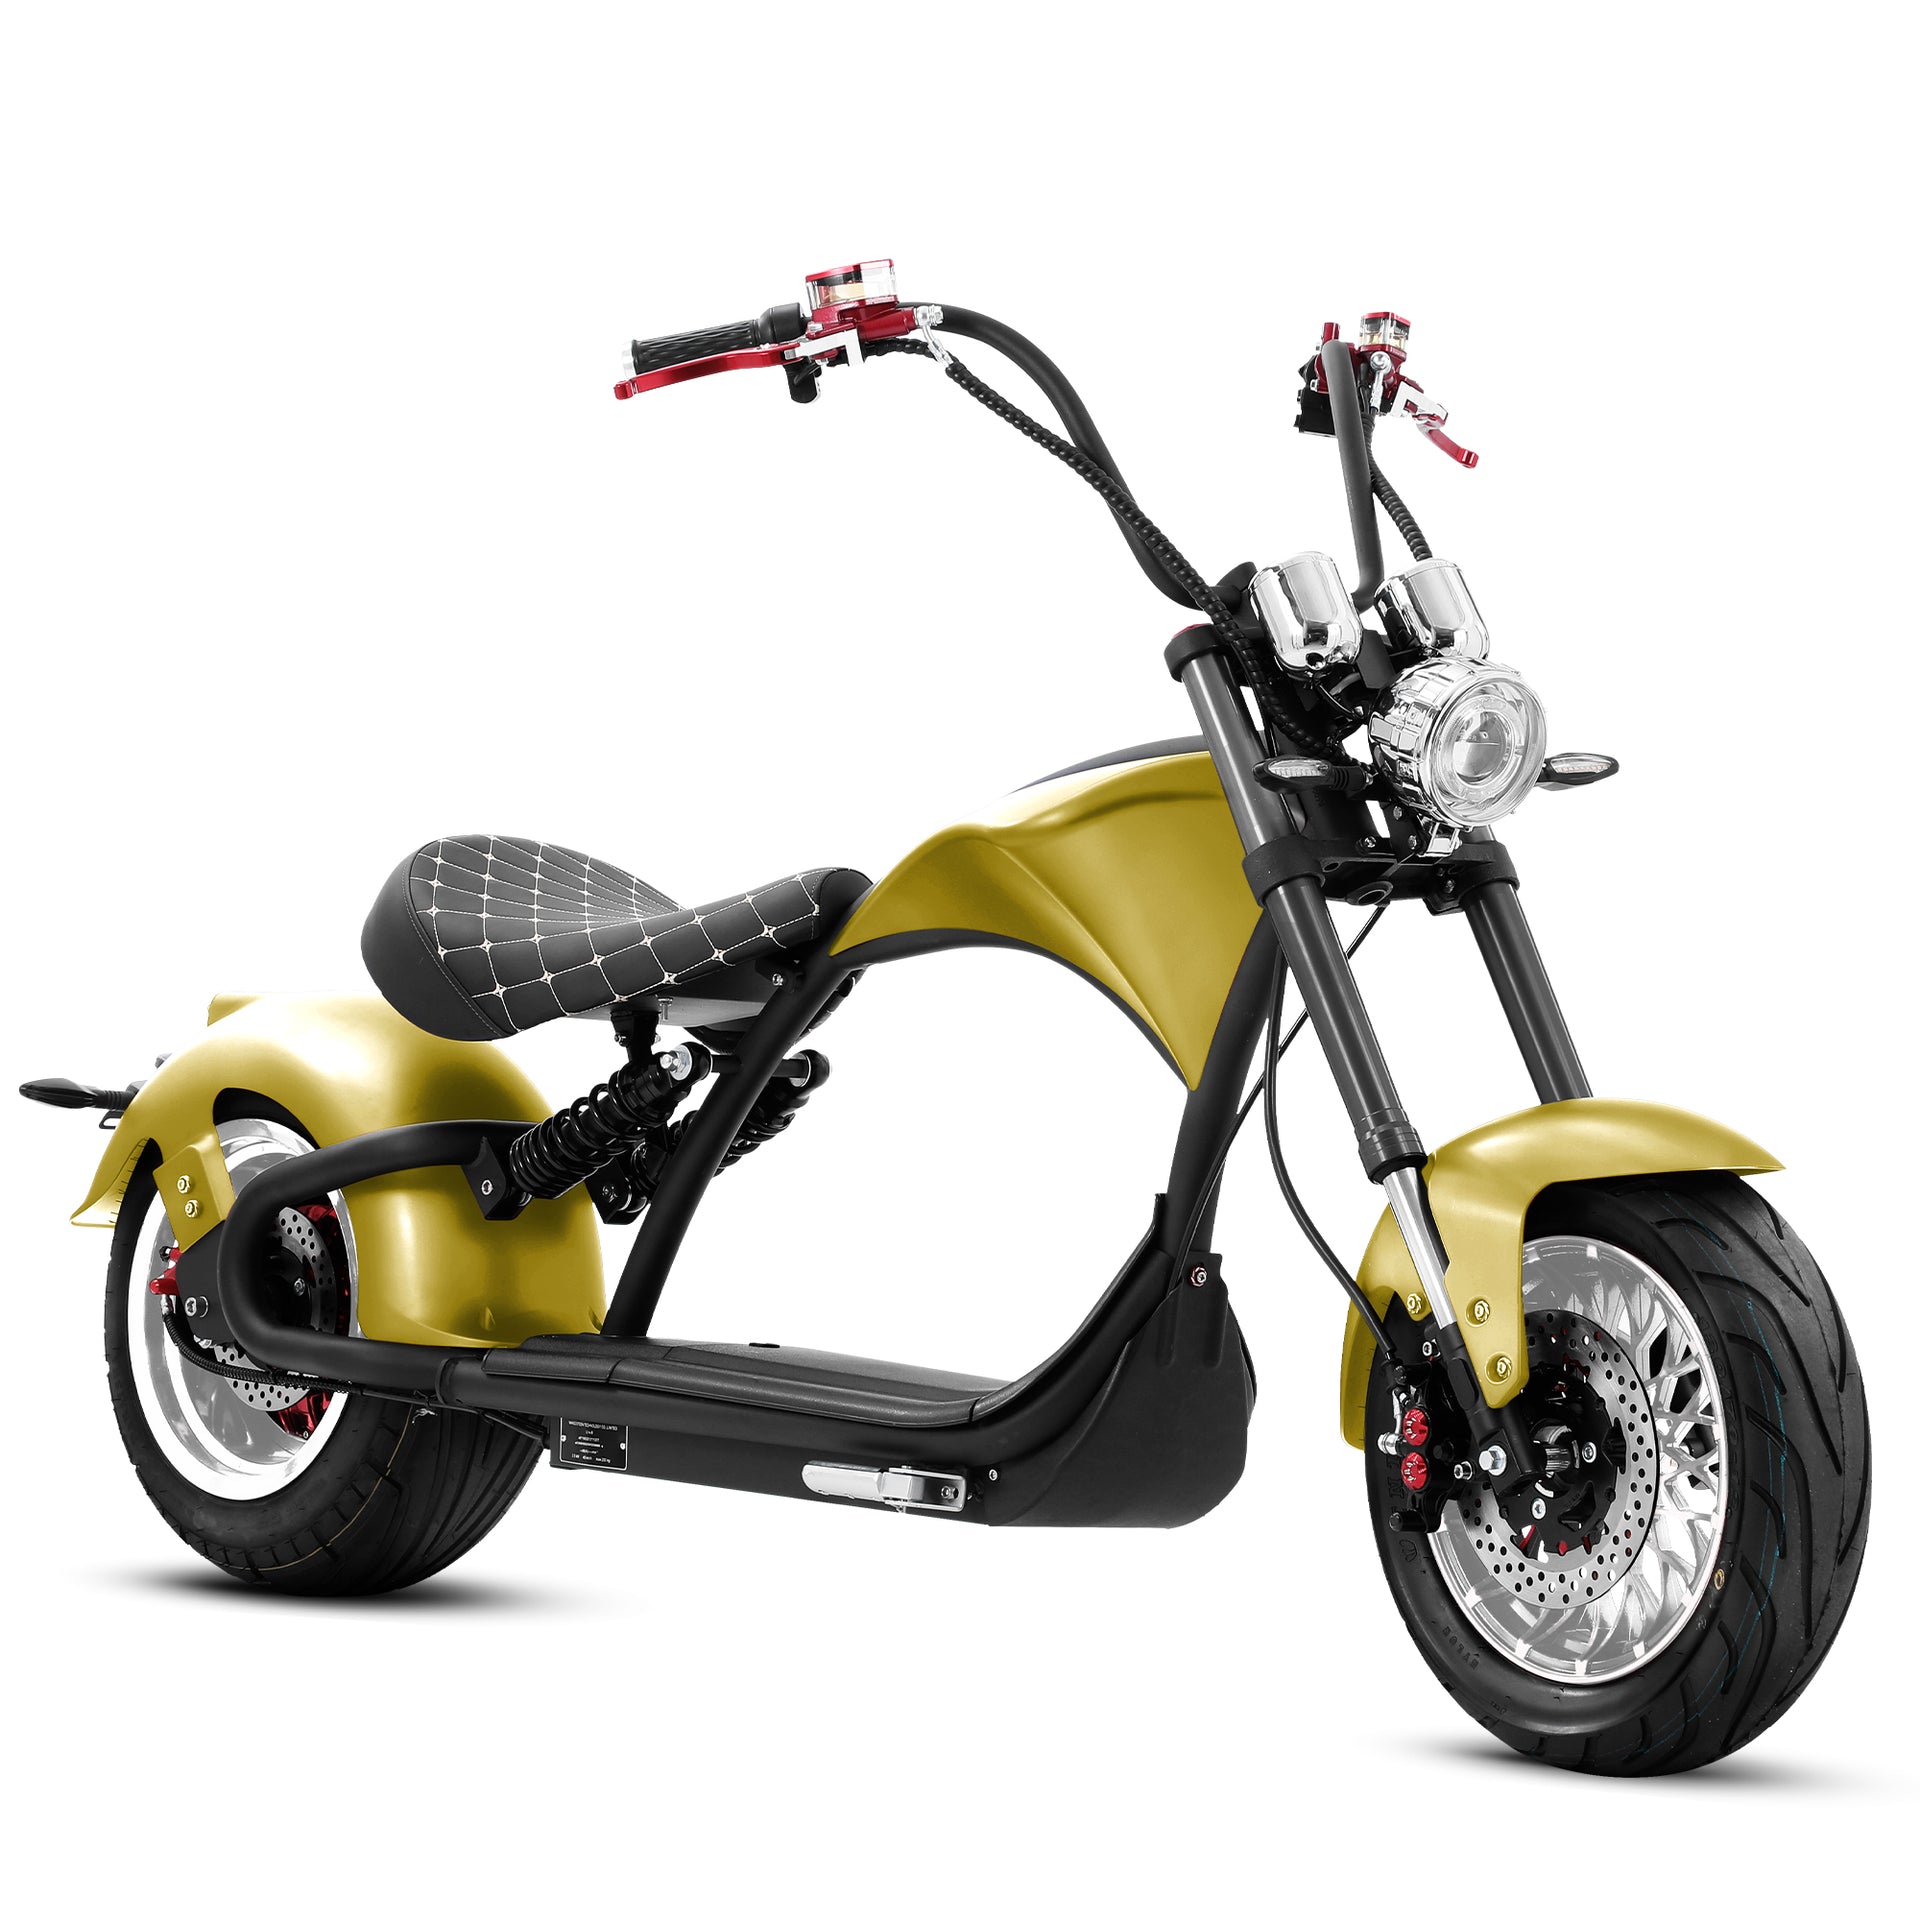 Eahora Emars M1P 2000W Electric Scooter With 60V 30AH 1.8KWH Battery - 37MPH - Old Gold